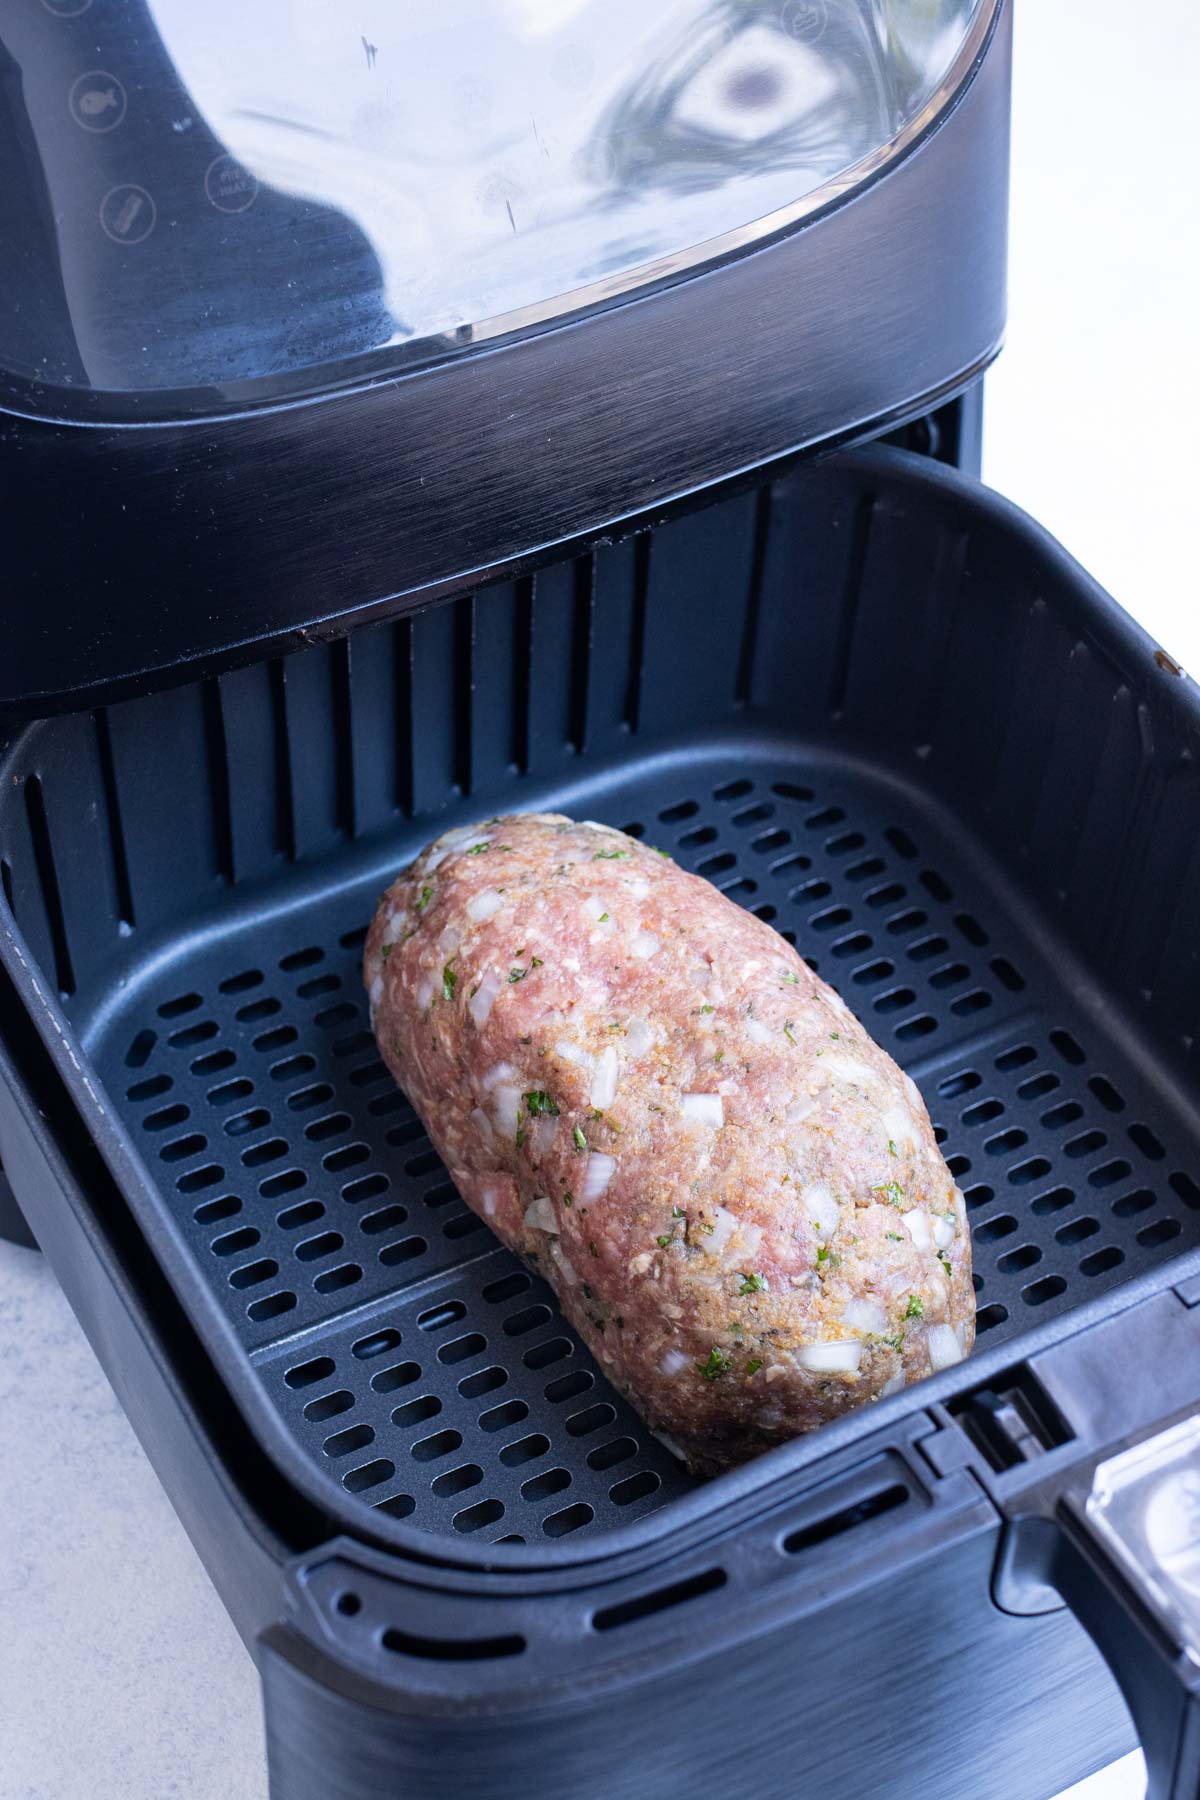 Meatloaf is cooked in half the time in the air fryer.